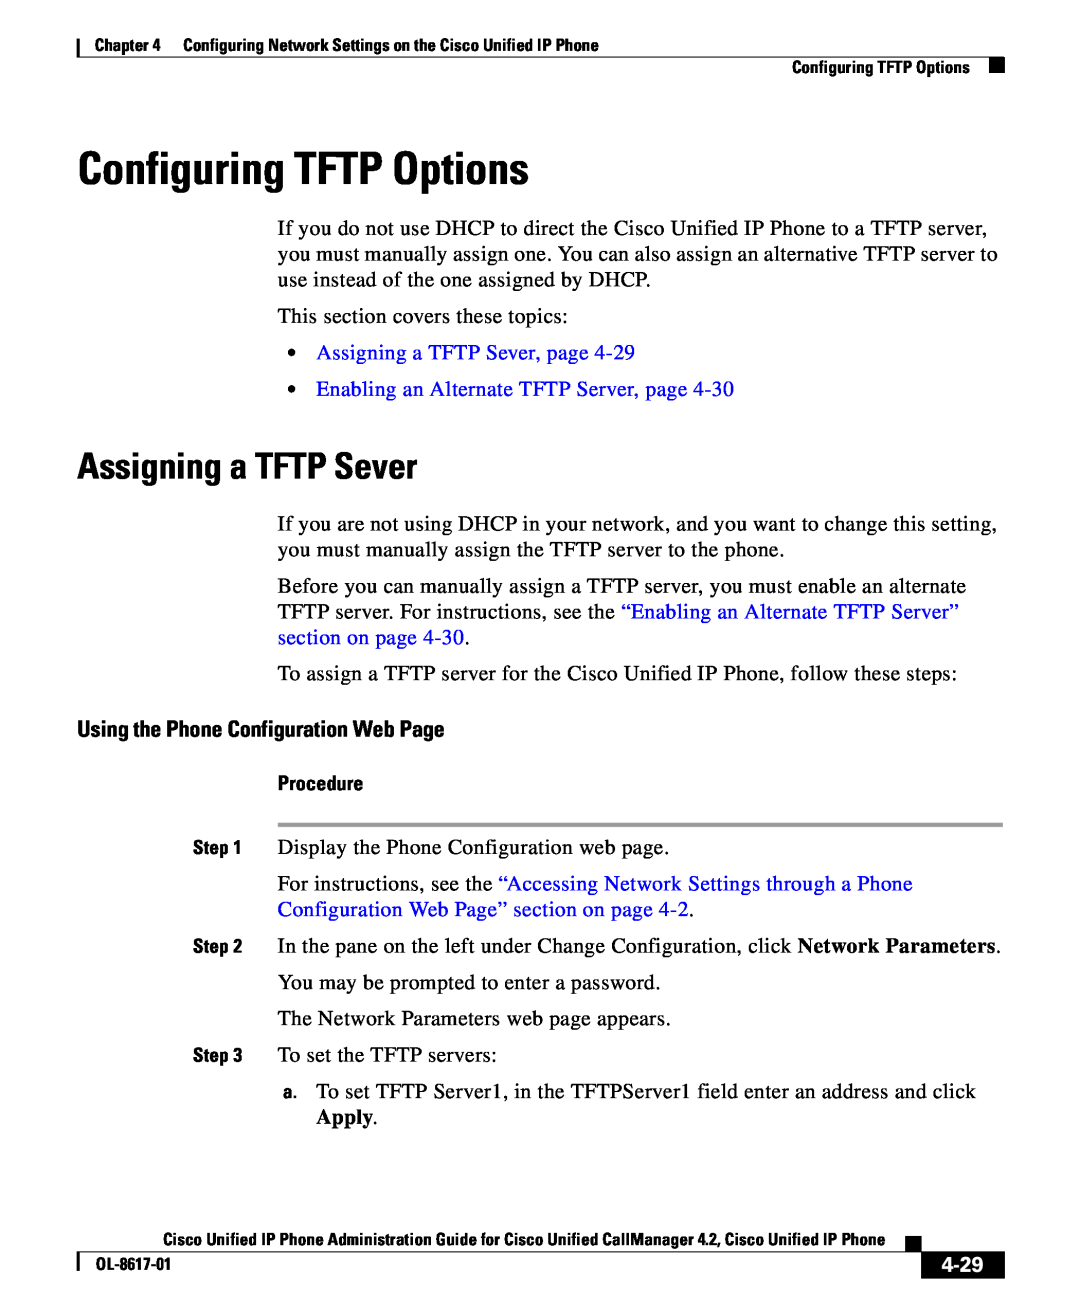 Cisco Systems 4.2 manual Configuring TFTP Options, Assigning a TFTP Sever, 4-29, Using the Phone Configuration Web Page 